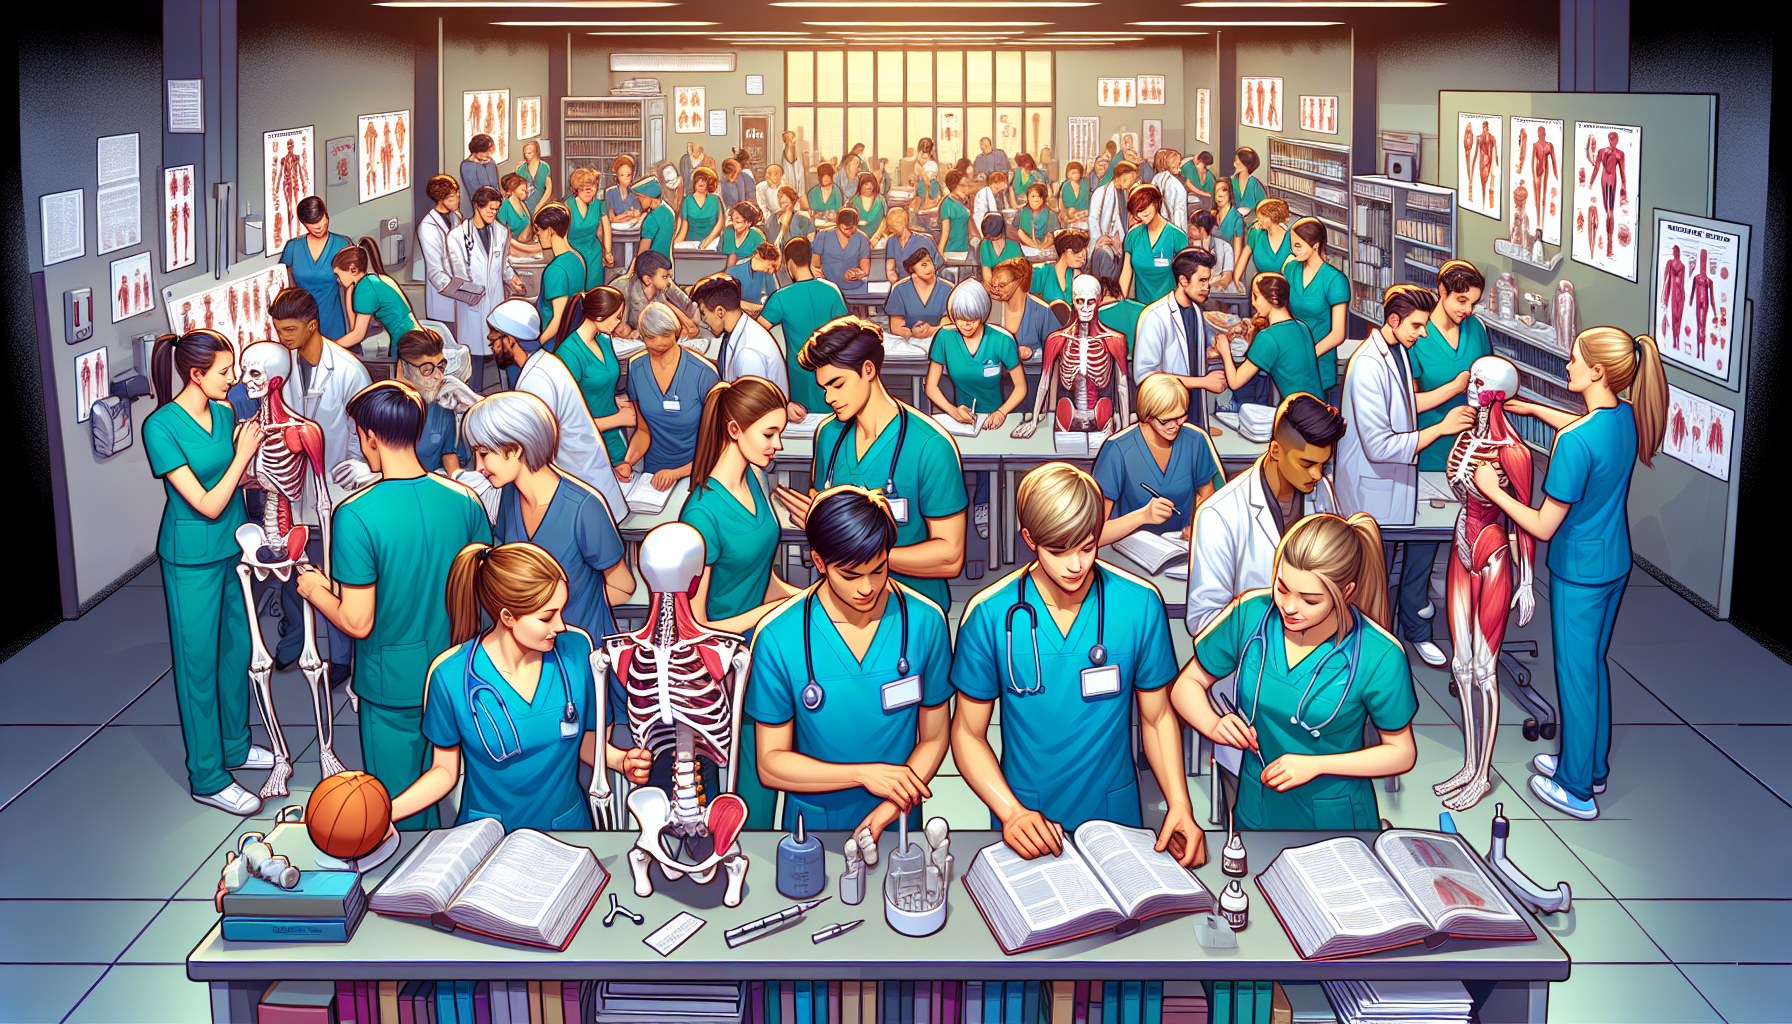 Illustration of students at a vocational school or community college